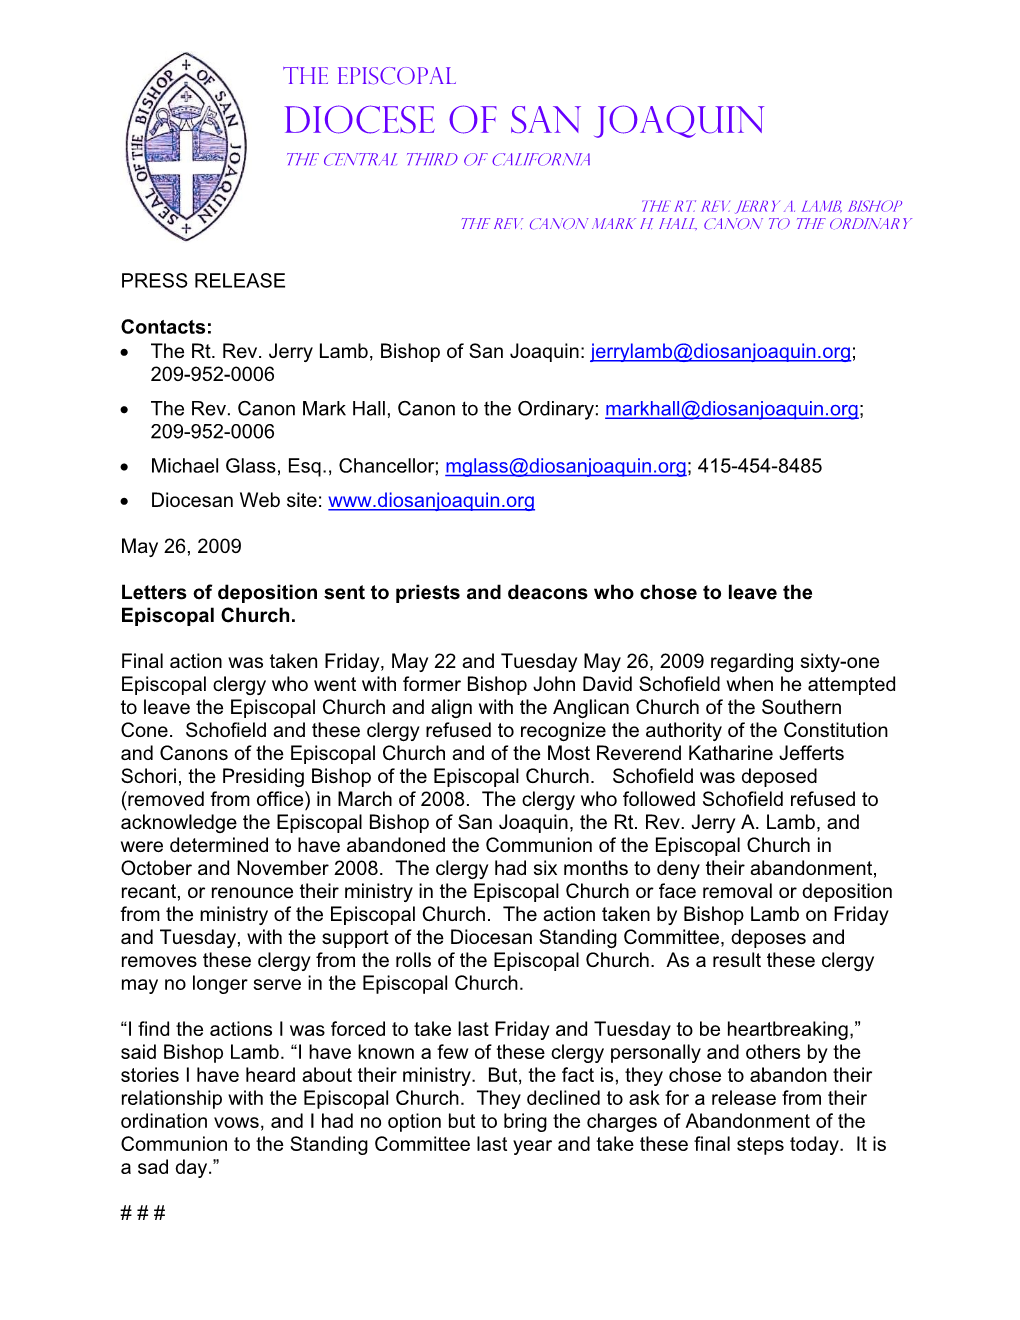 Letters of Deposition Sent to Priests and Deacons Who Chose to Leave the Episcopal Church